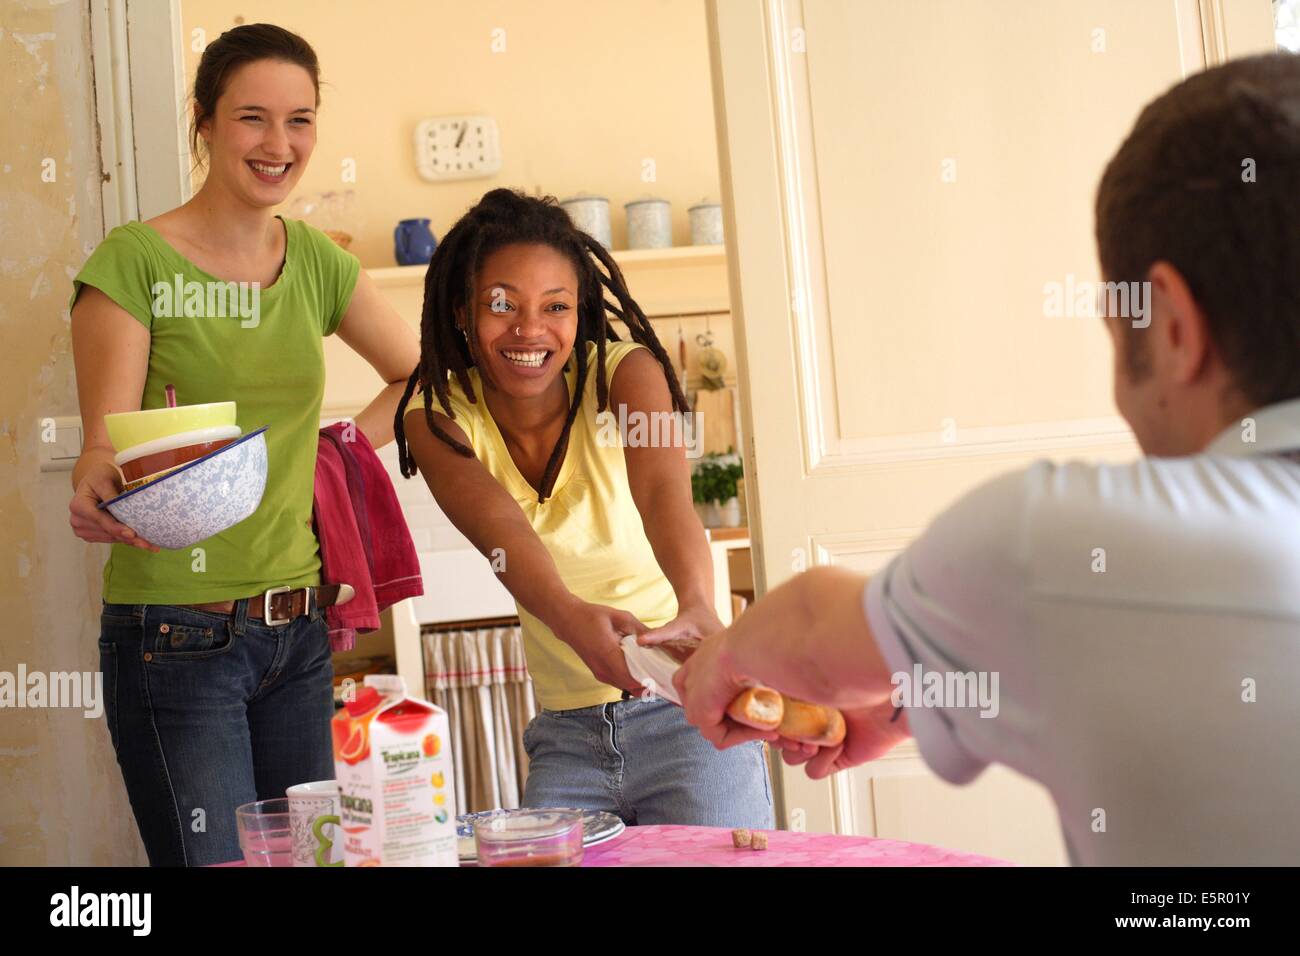 Young people, Roommate. Stock Photo